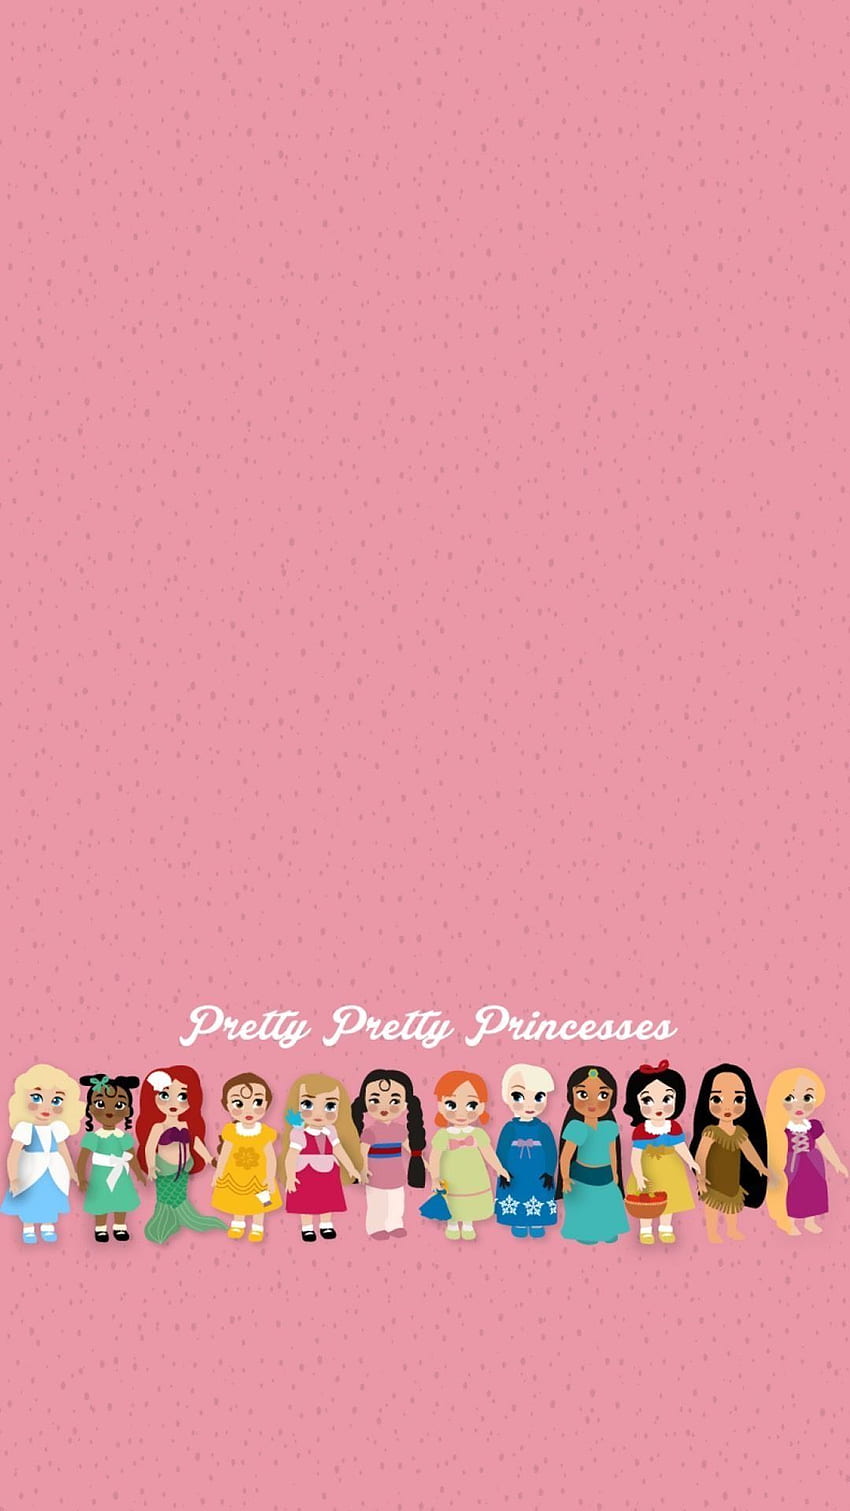 A pink background with several princesses on it - Belle, princess